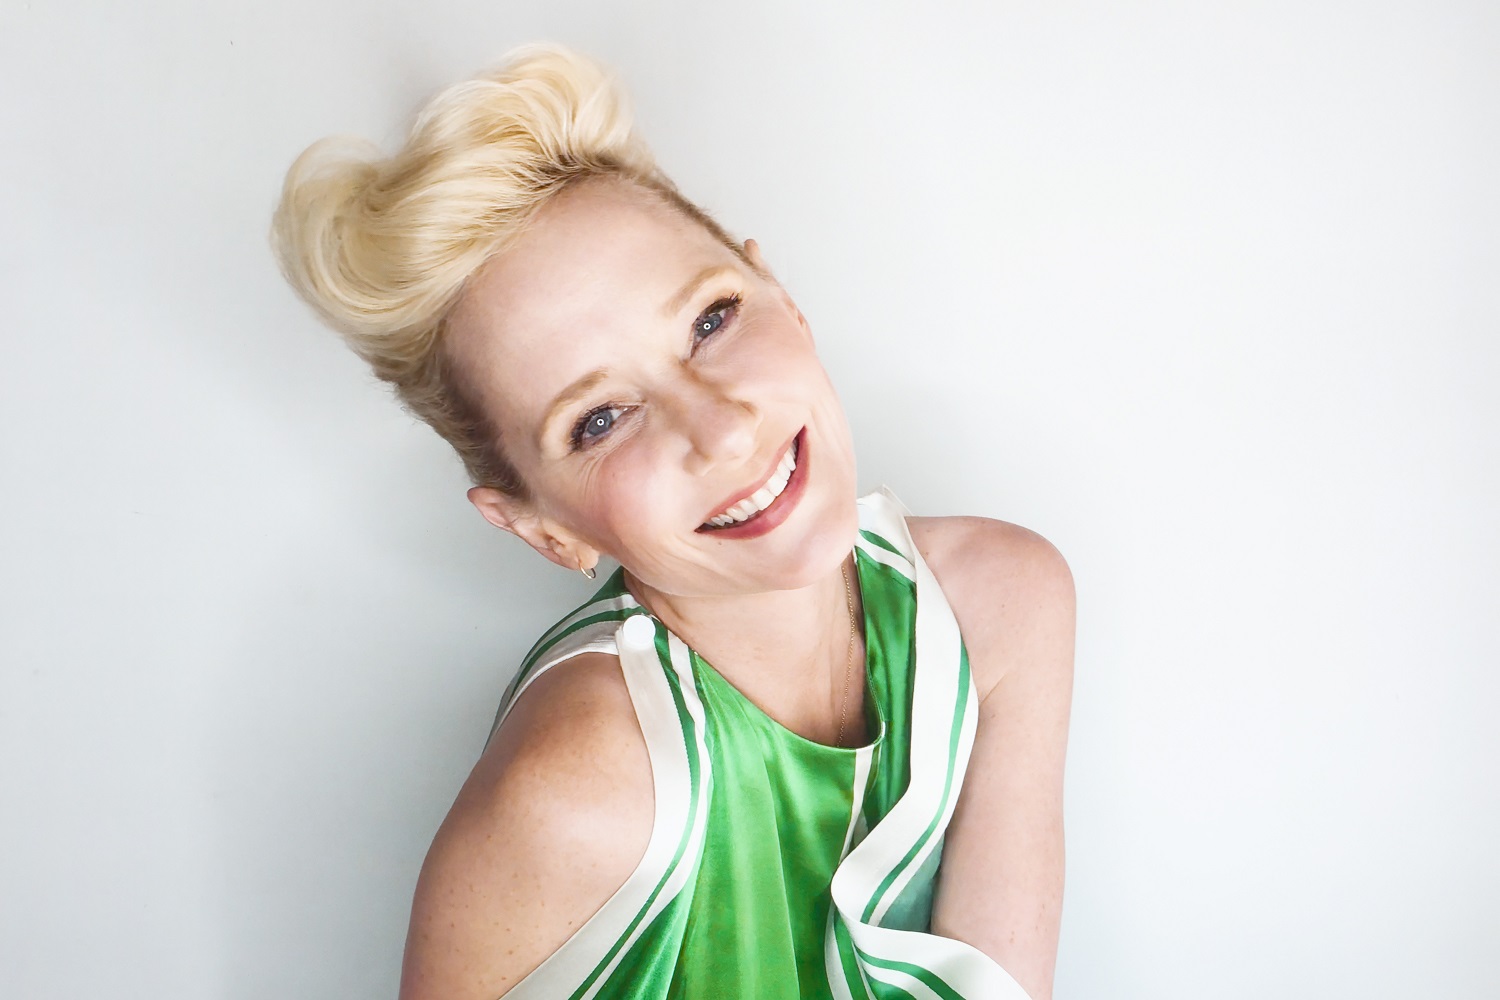 ABC's "Dancing With The Stars" stars Anne Heche.